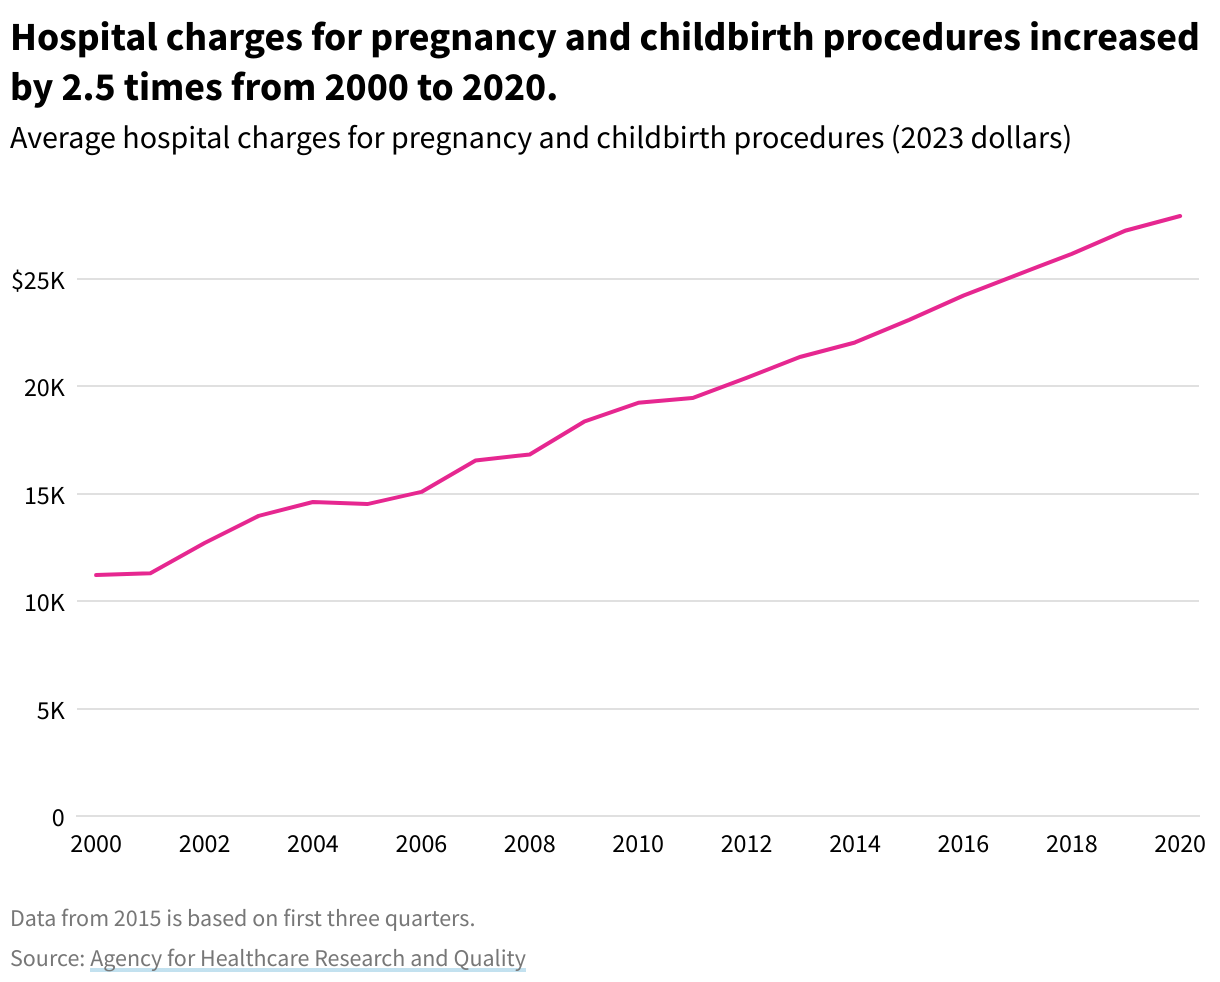 A line chart showing the inflation-adjusted average hospital charges for pregnancy and childbirth procedures (2023 dollars). Hospital charges for pregnancy and childbirth procedures increased by 2.5 times from 2000 to 2020.